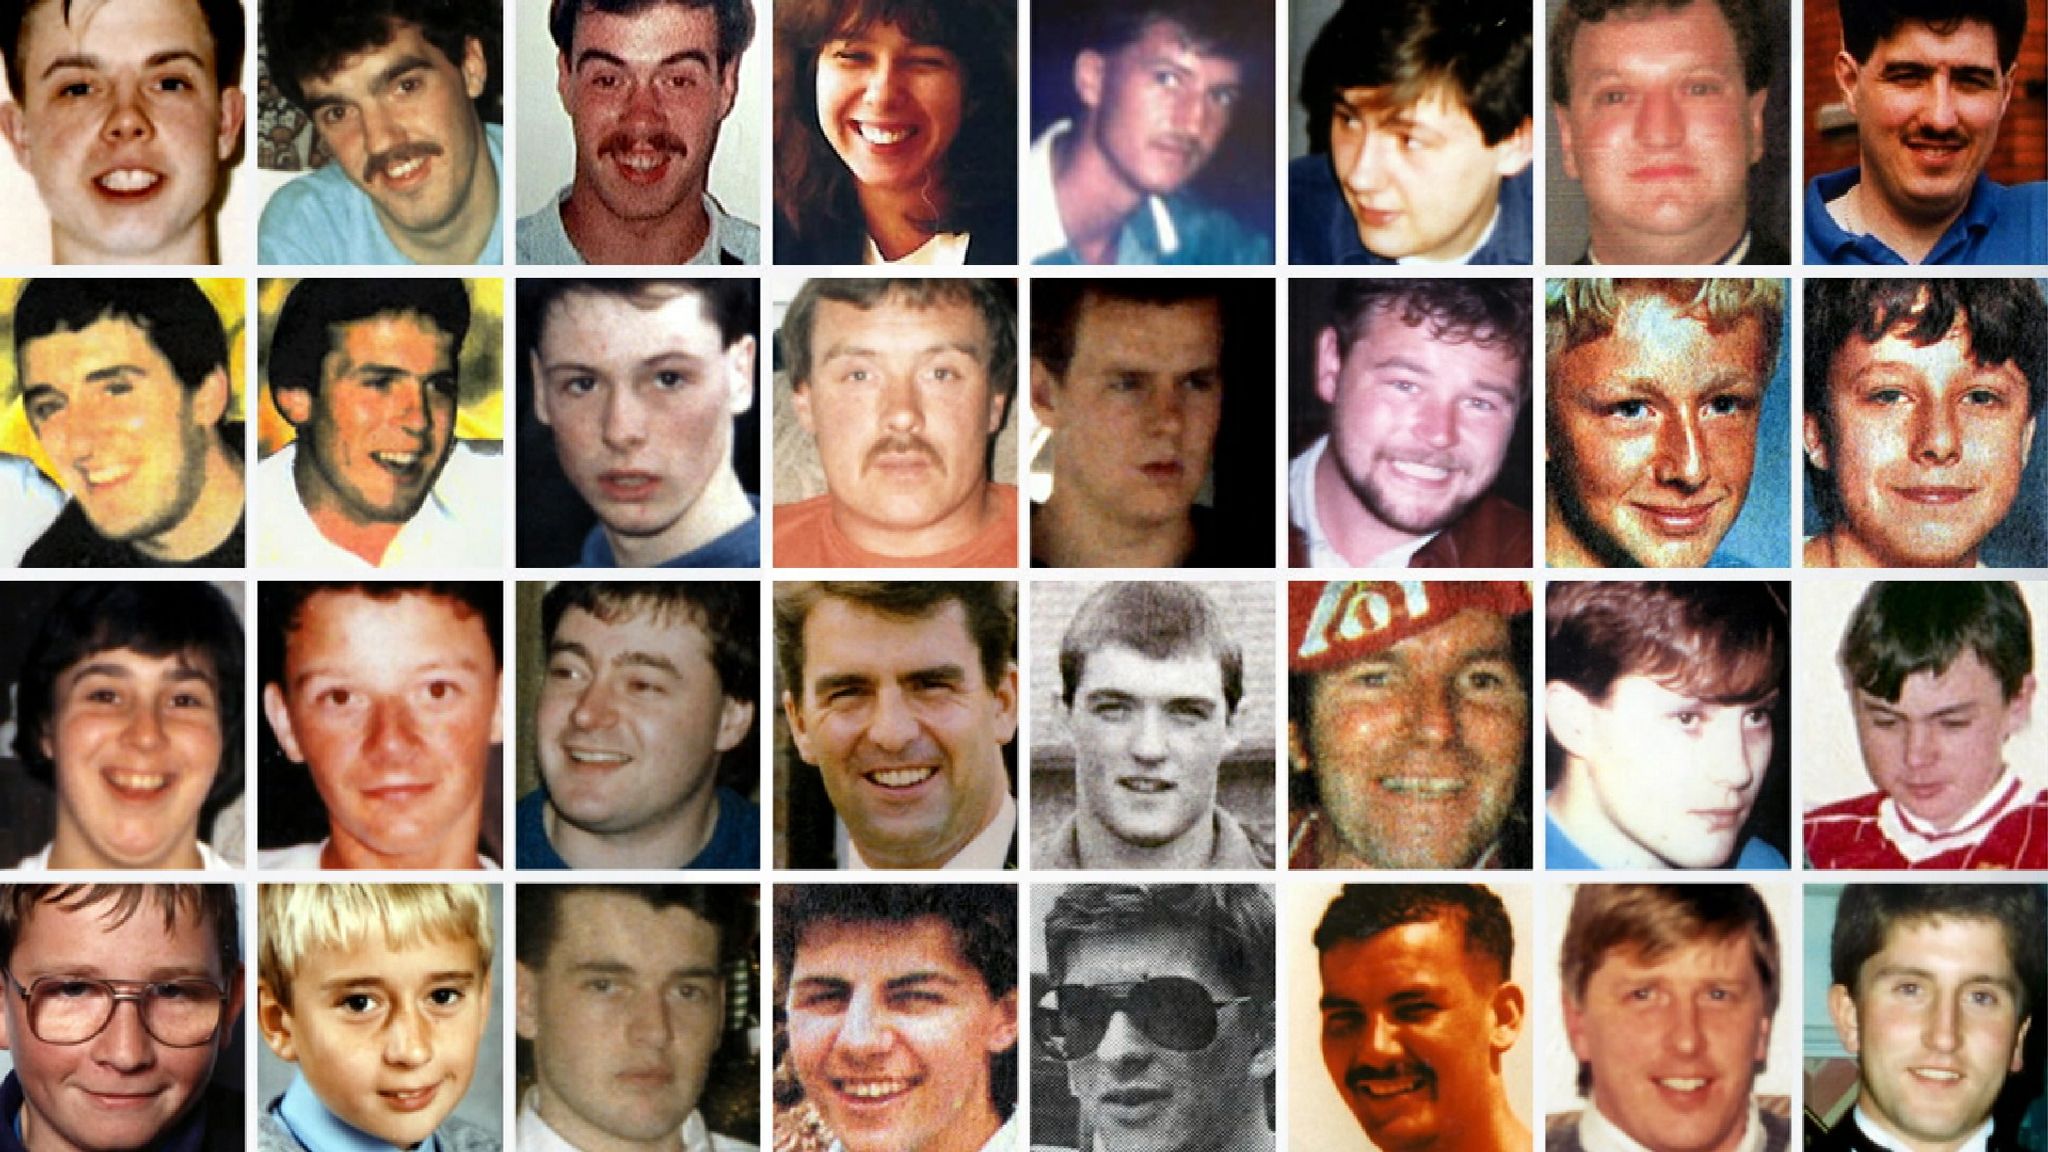 Hillsborough disaster 600 survivors and families to get compensation